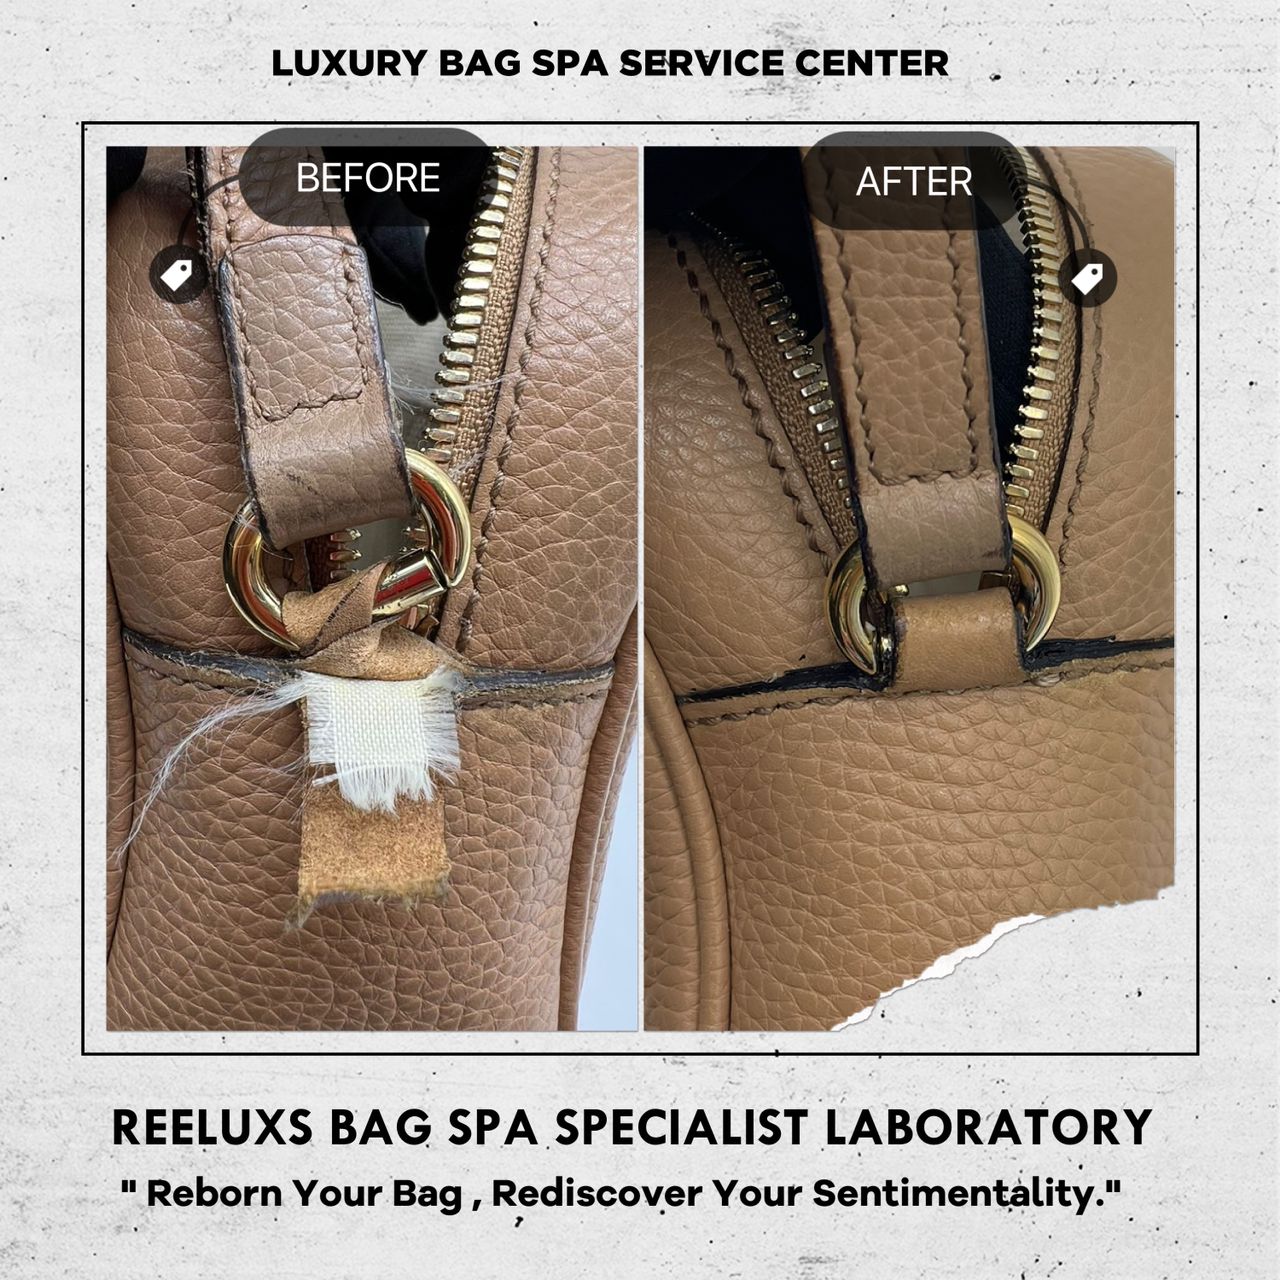 Joanna's Bag Spa - Vachetta is the leather that is found on many